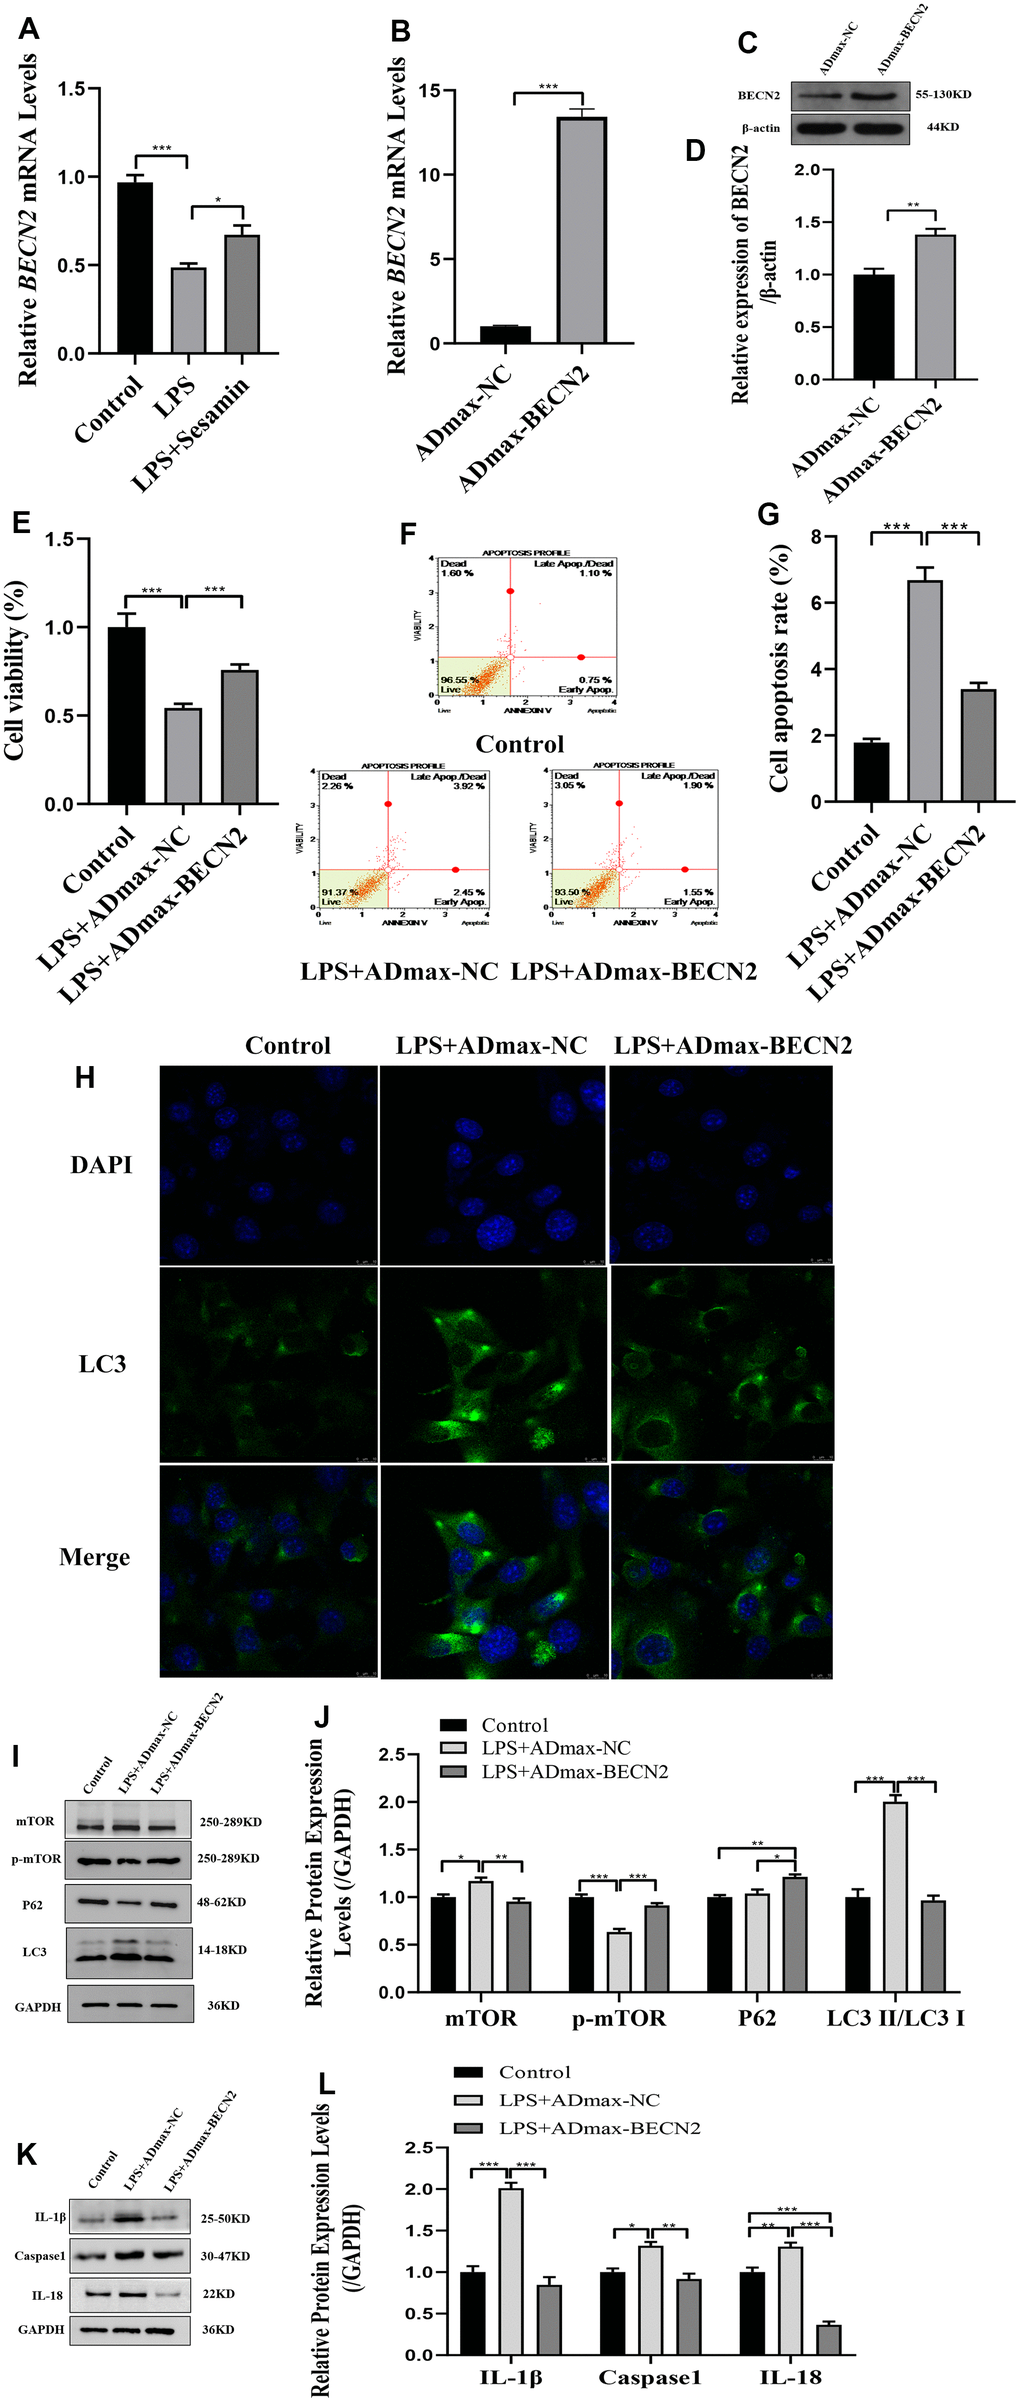 The effect of BECN2 overexpression on the function of LPS-induced ATDC5 degeneration. (A) The mRNA level of BECN2 was detected by RT-PCR in LPS-induced ATDC5 cells. (B) The effect of ADmax-BECN2 on the mRNA expression of BECN2 was detected by RT-PCR. (C) The protein level of BECN2 was evaluated by western blot. (D) The protein expression of BECN2 were determined using ImageJ software, GAPDH was used as the internal control, respectively (n=3). (E) CCK-8 was used to assess cell viability. (F, G) Cell apoptosis was detected by Muse. (H) The immunofluorescence staining of LC3 was used to evaluate the autophagy level (green signals represent LC3, blue signals represent DAPI, scale bar: 10 μm). (I, J) Autophagy-related protein expression levels were determined by immunoblotting. (K, L) The expression of IL-1β, Caspase1 and IL-18 were assessed by western blot. Relative protein expression was qualified by ImageJ software, GAPDH was used as the internal control, respectively. All data represent mean ± SD. All in vitro experiments were repeated three times independently. * p p p 